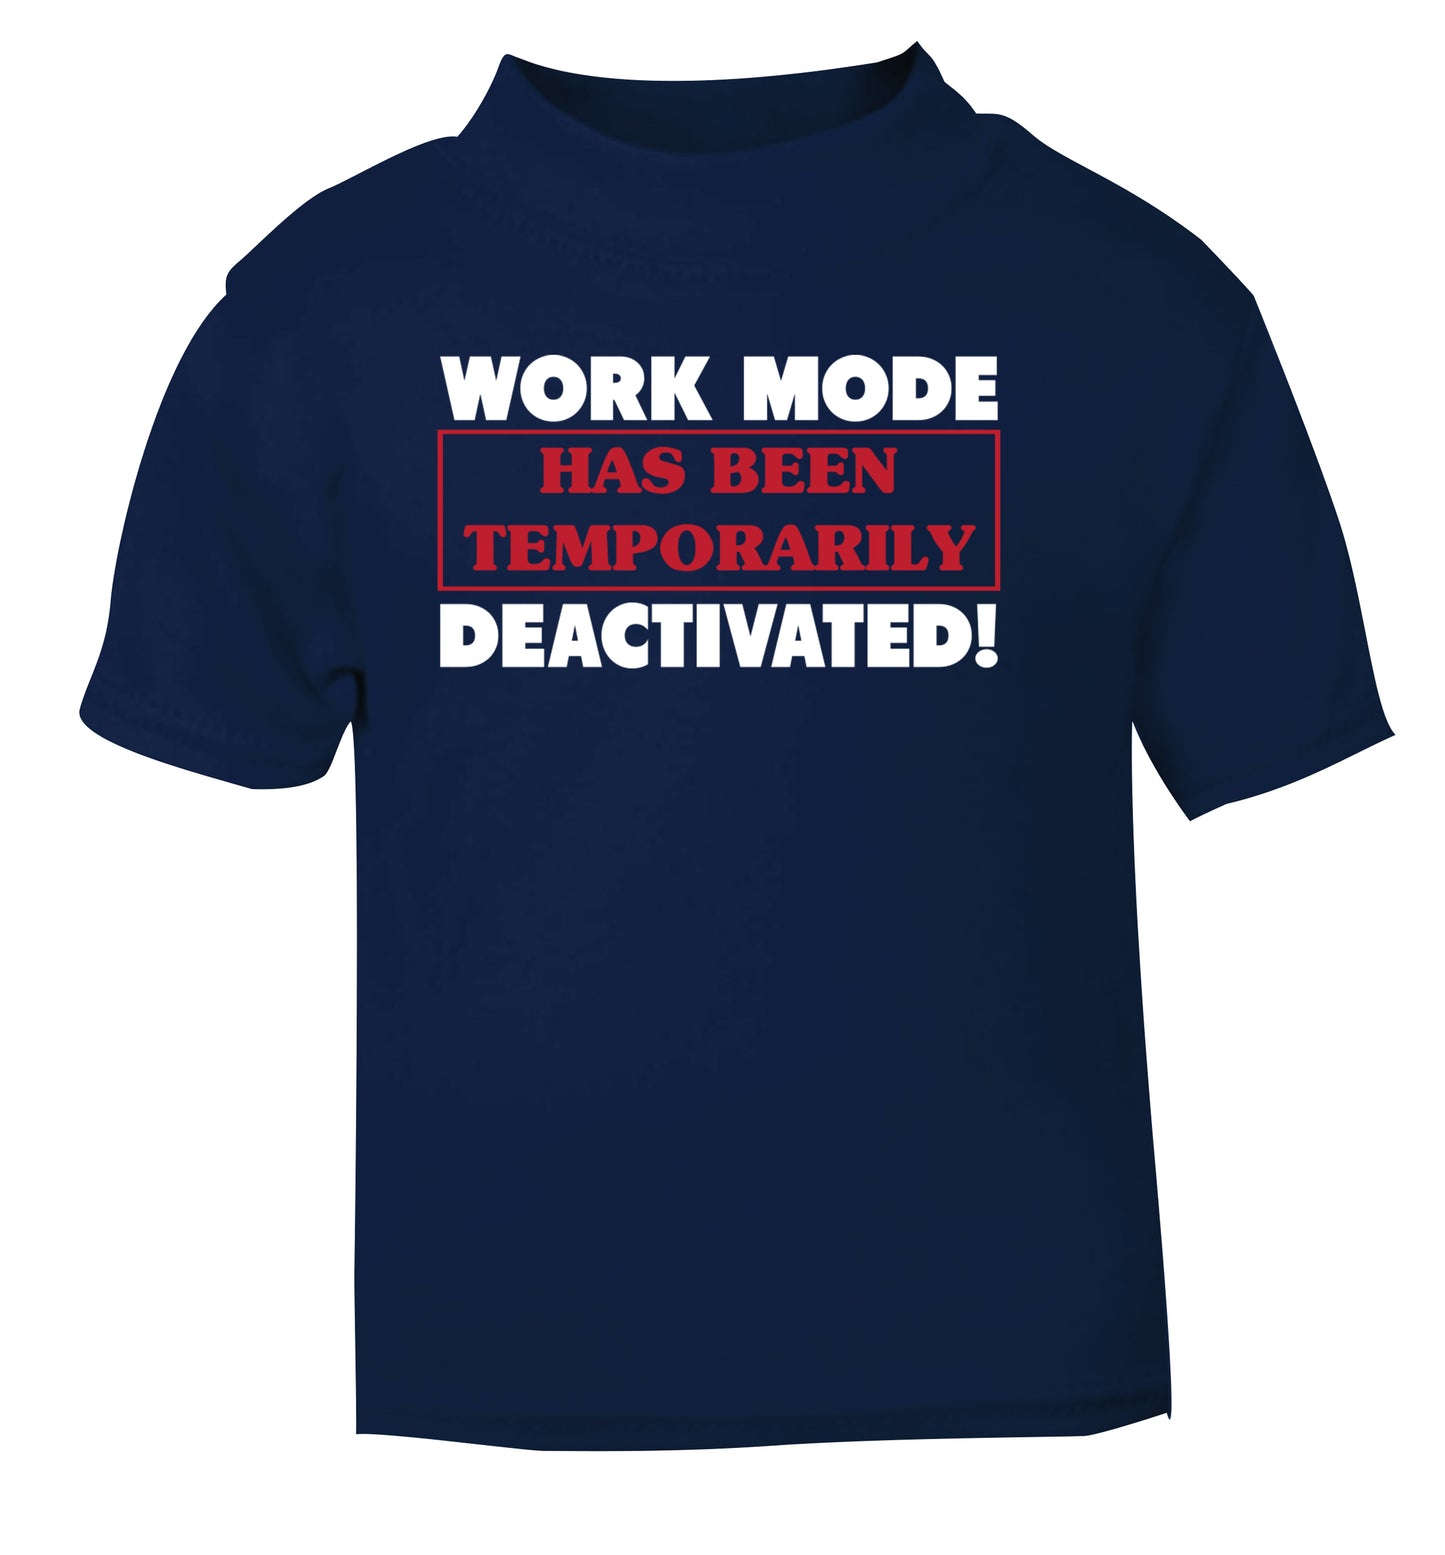 Work mode has now been temporarily deactivated navy Baby Toddler Tshirt 2 Years